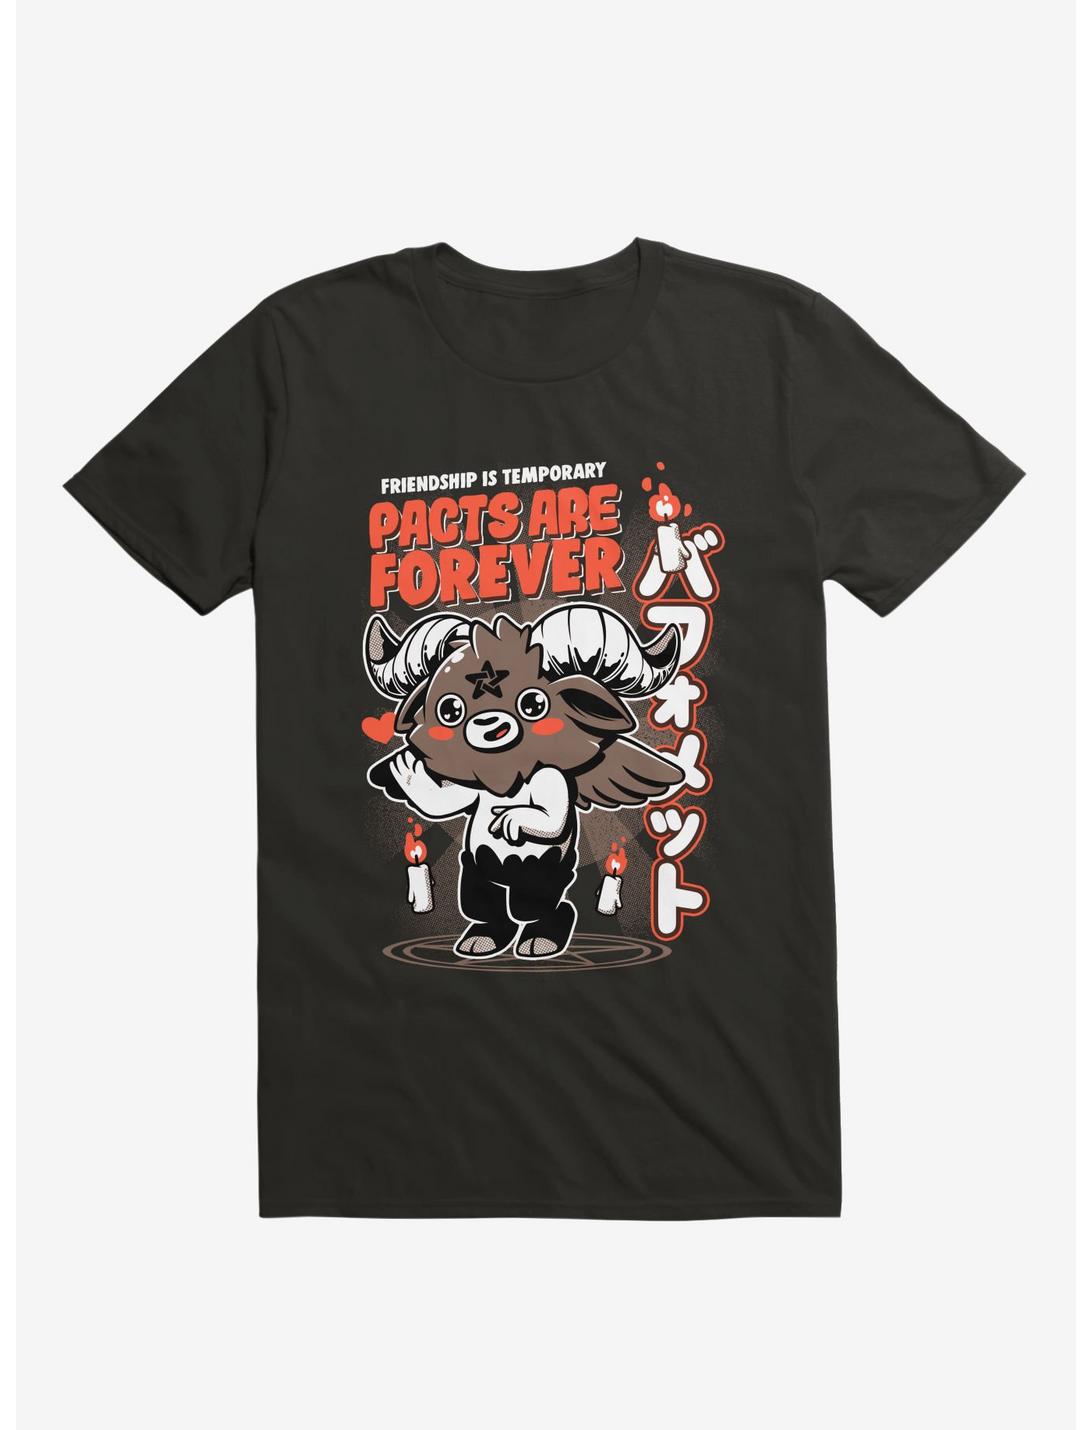 Pacts Are Forever Satan Black T-Shirt, BLACK, hi-res